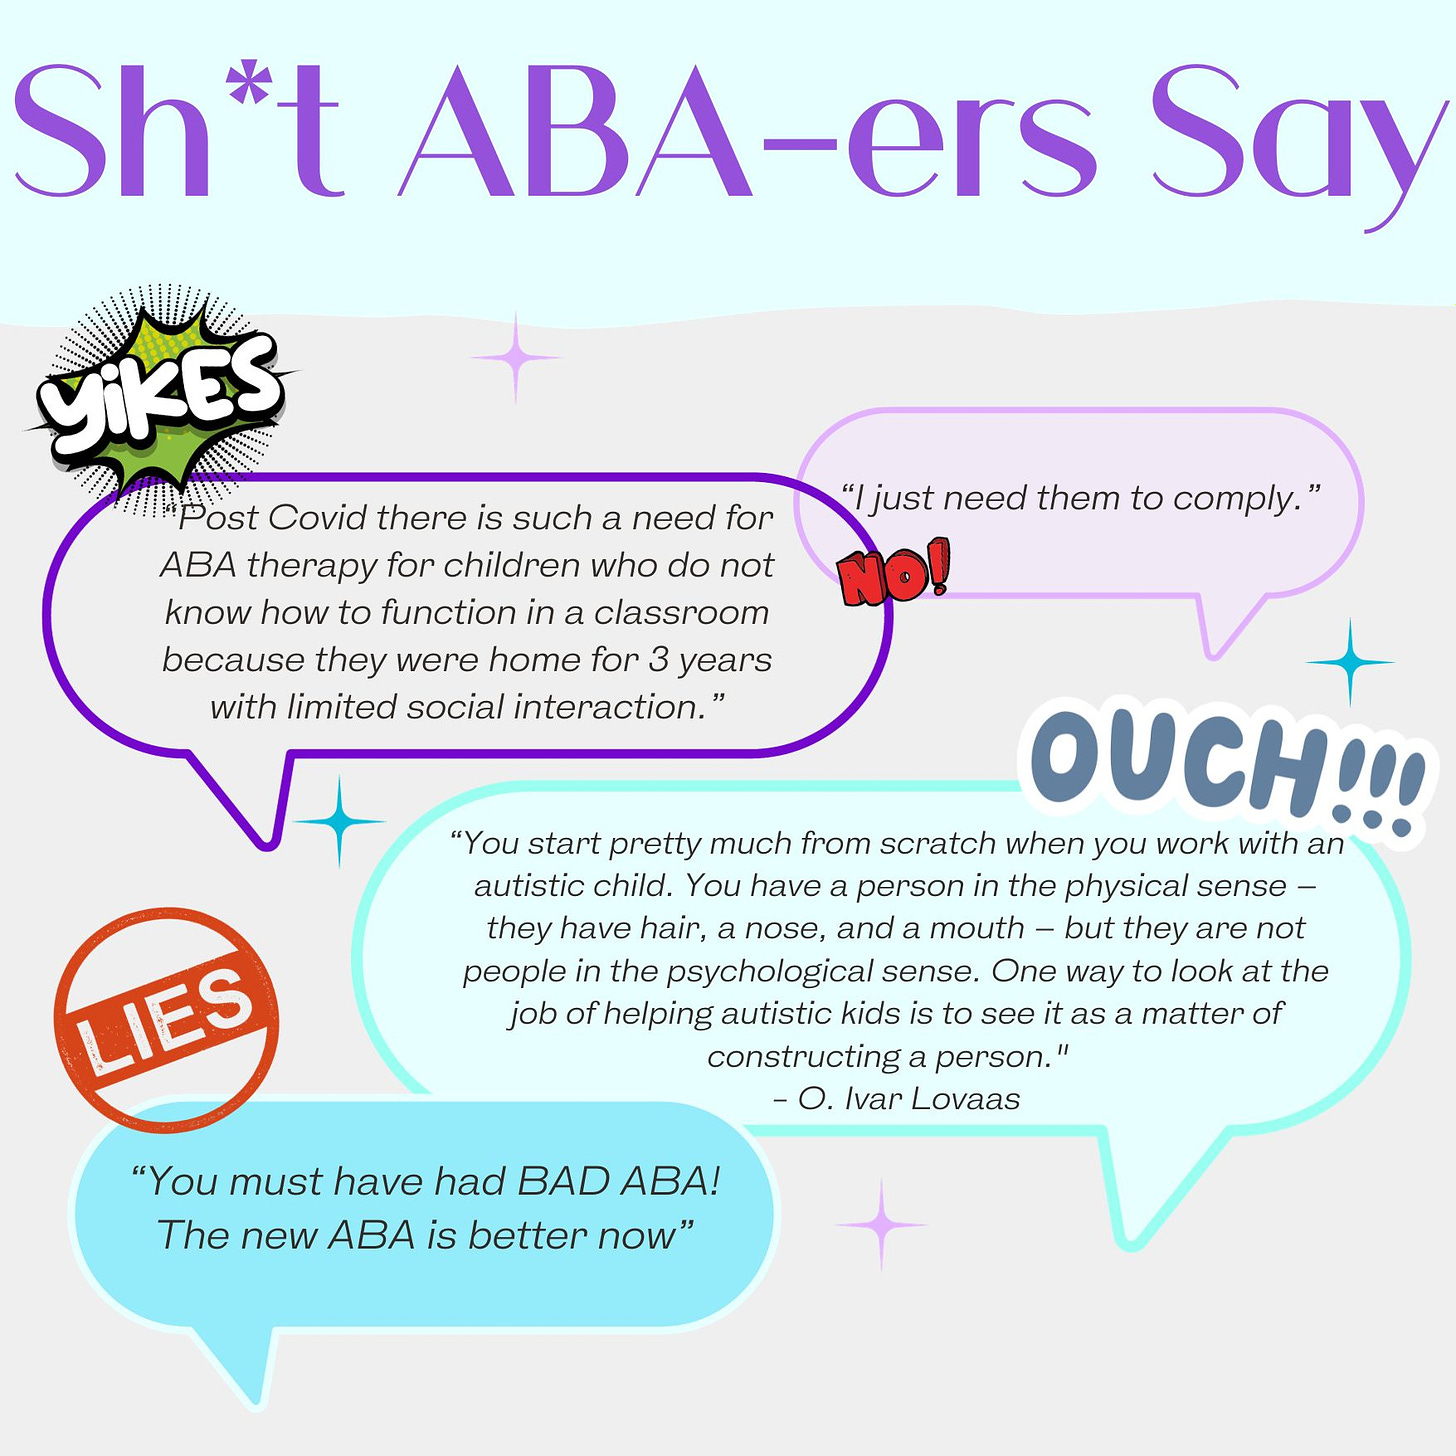 Shit ABA-ers Say, “I just need them to comply.” “Post Covid there is such a need for ABA therapy for children who do not know how to function in a classroom because they were home for three years with limited social interaction.”You start pretty much from scratch when you work with an autistic child. You have a person in the physical sense - they have hair, a nose, and a moth, but they are not people in the psychological sense. One way to look at the job of helping autistic kids is to see it as a matter of constructing a person.” “You MUST have had BAD ABA! The NEW ABA is better now".”